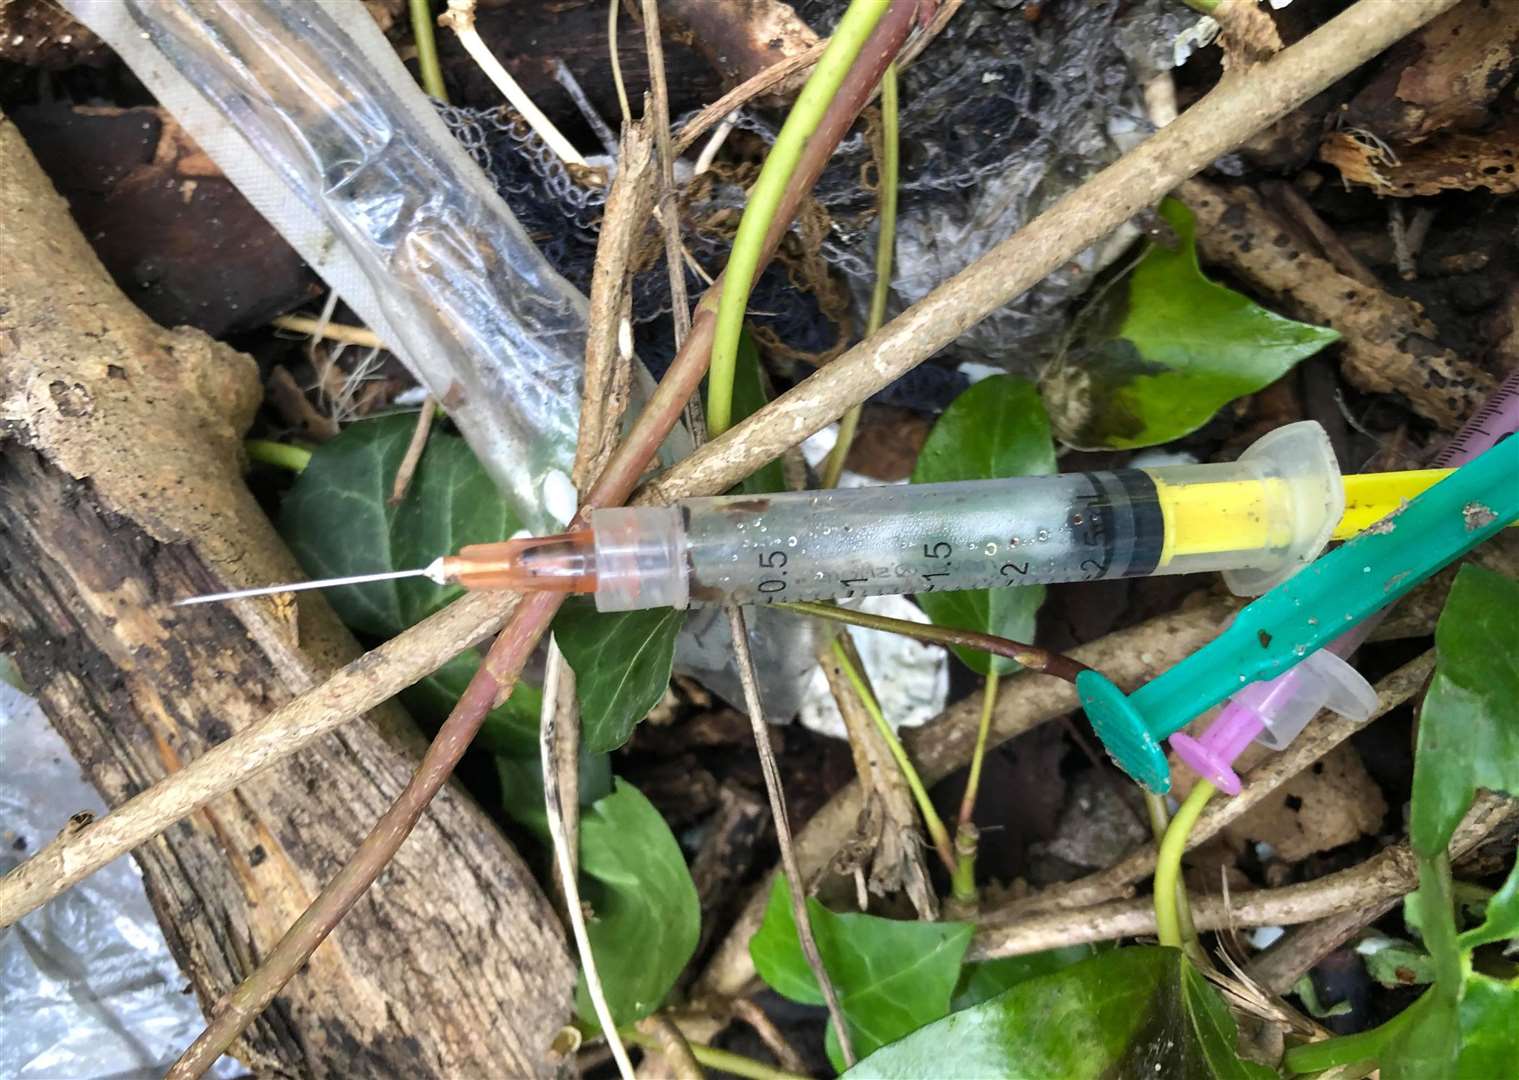 Needles and other litter found in Lower Radnor Park